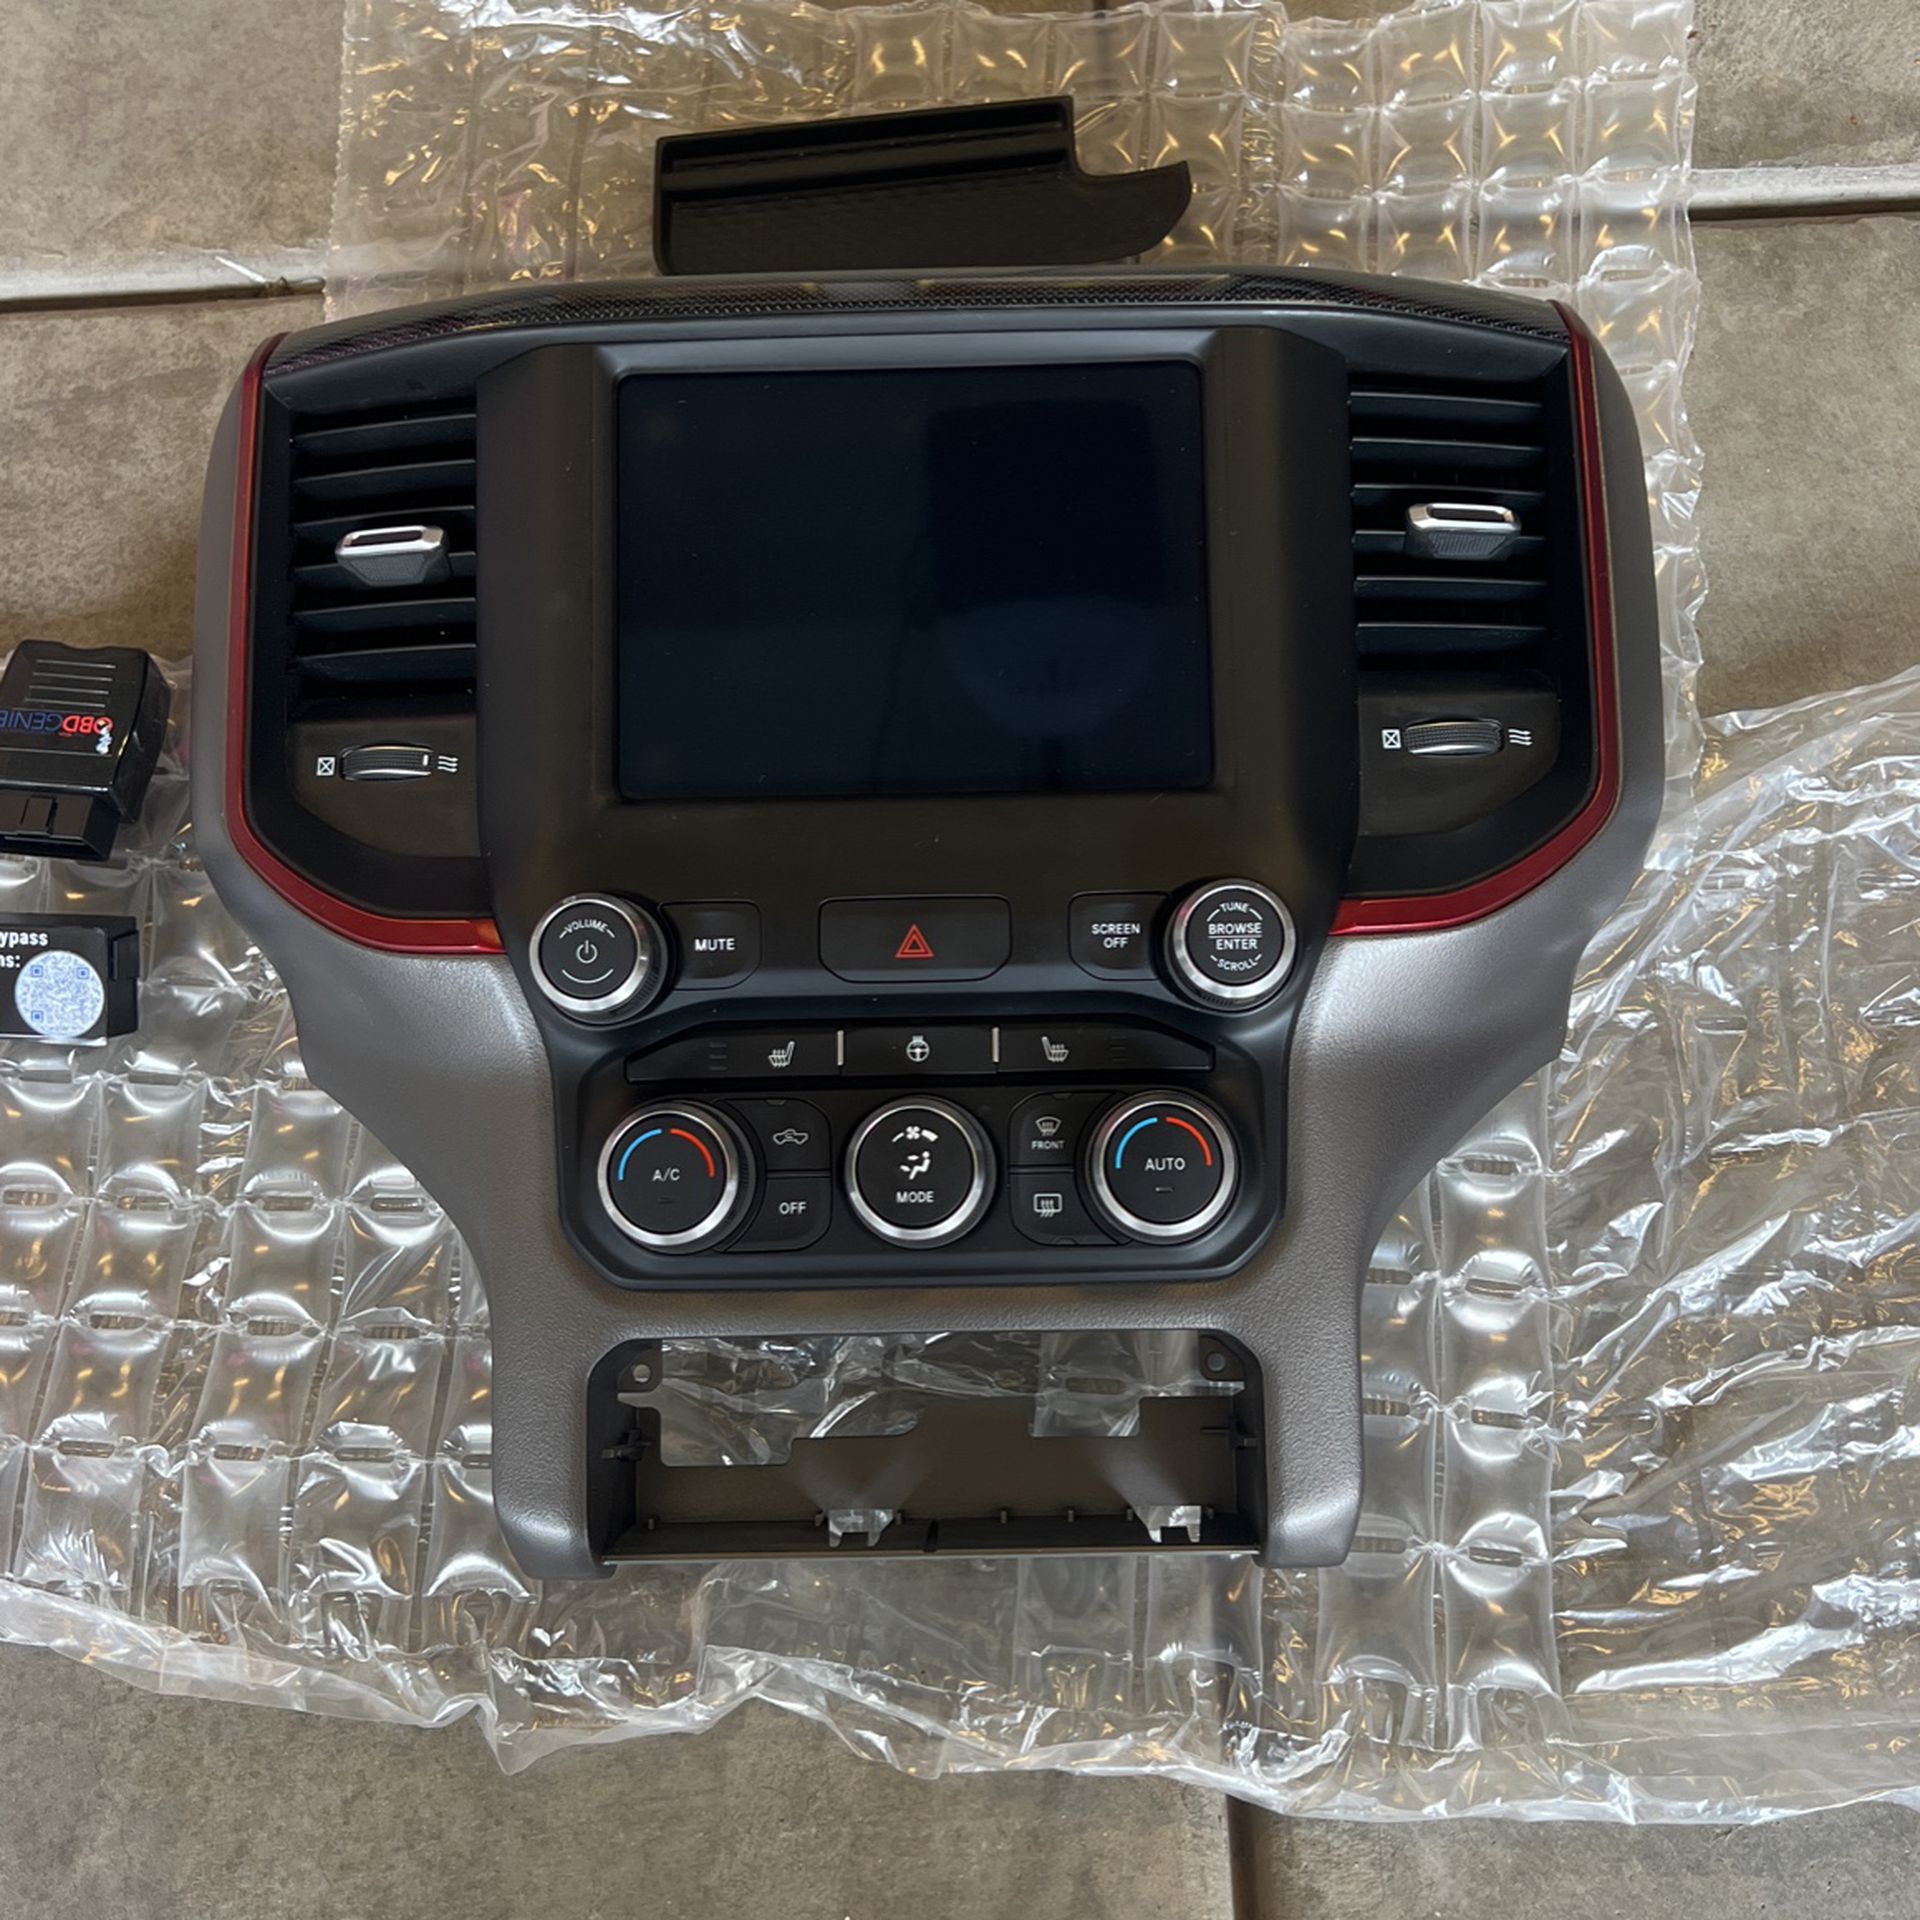 RAM 1500 Truck Infotainment System Radio. 2019-2023. Great Value & In Mint Condition Like New.